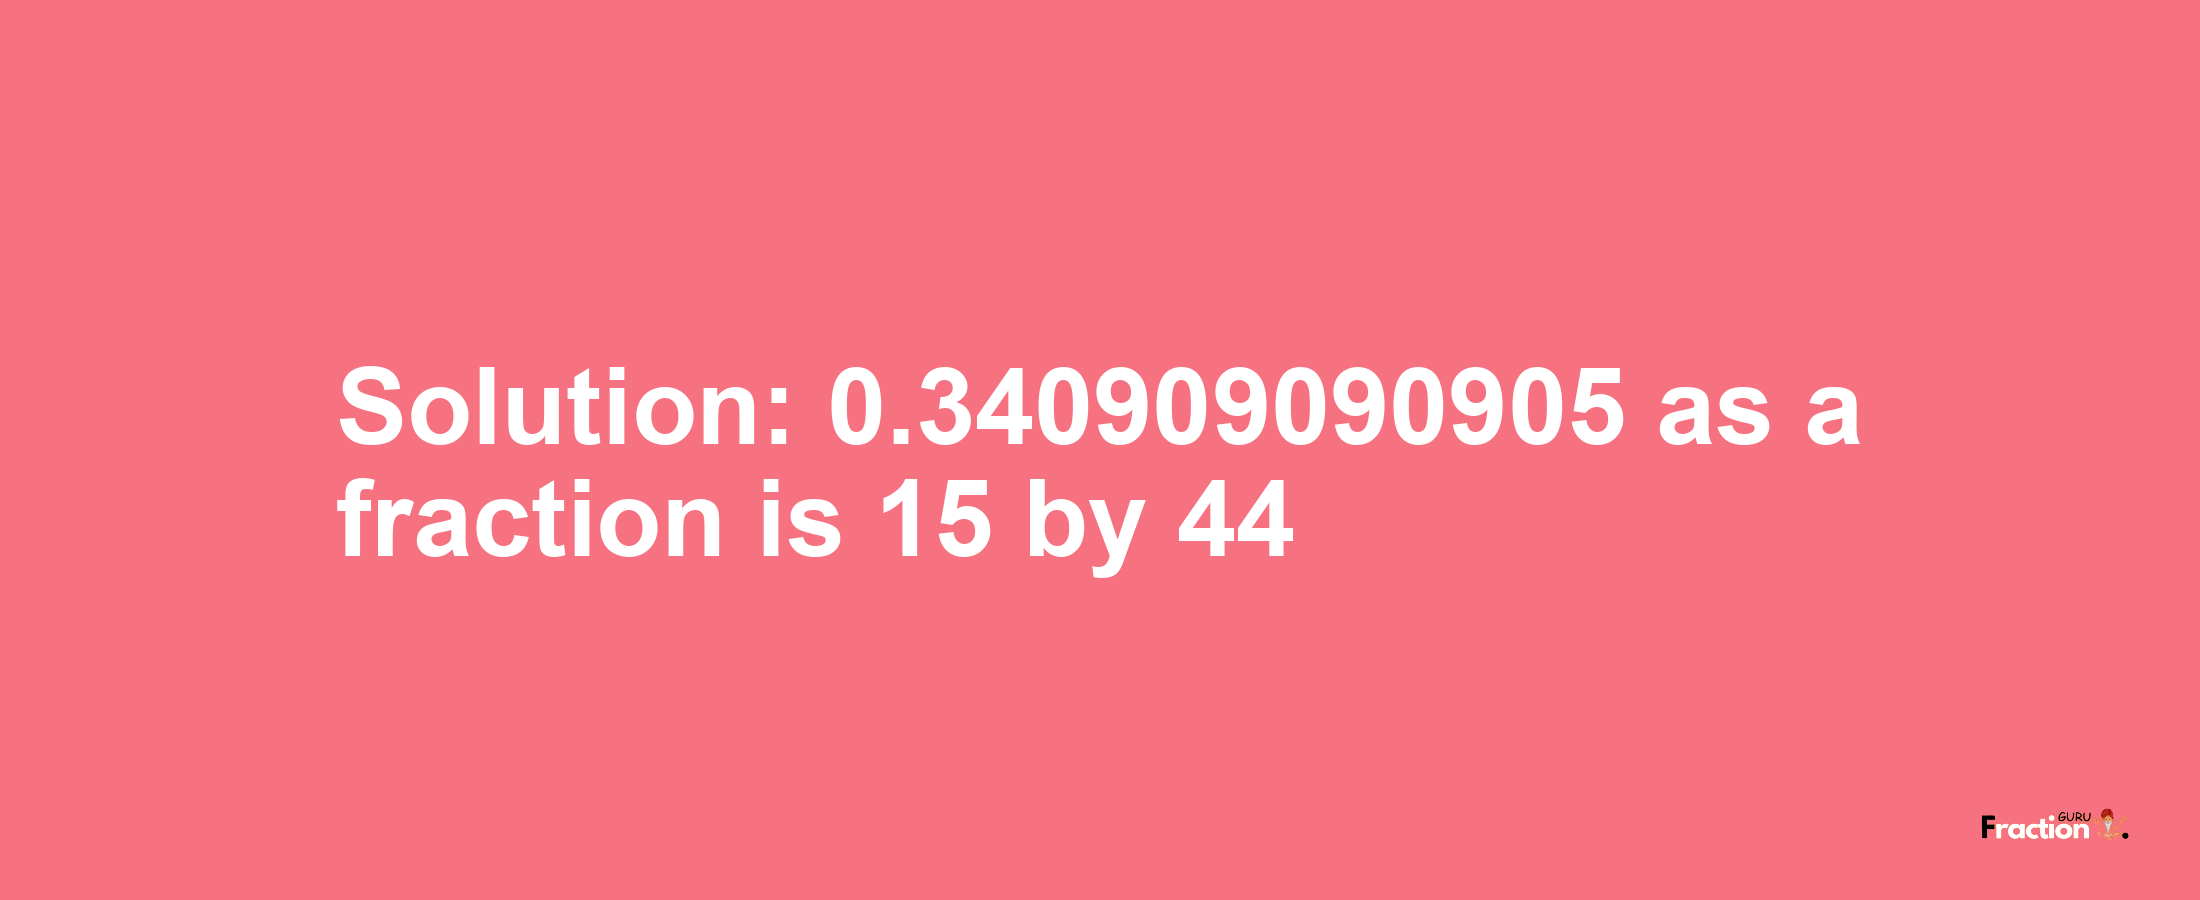 Solution:0.340909090905 as a fraction is 15/44